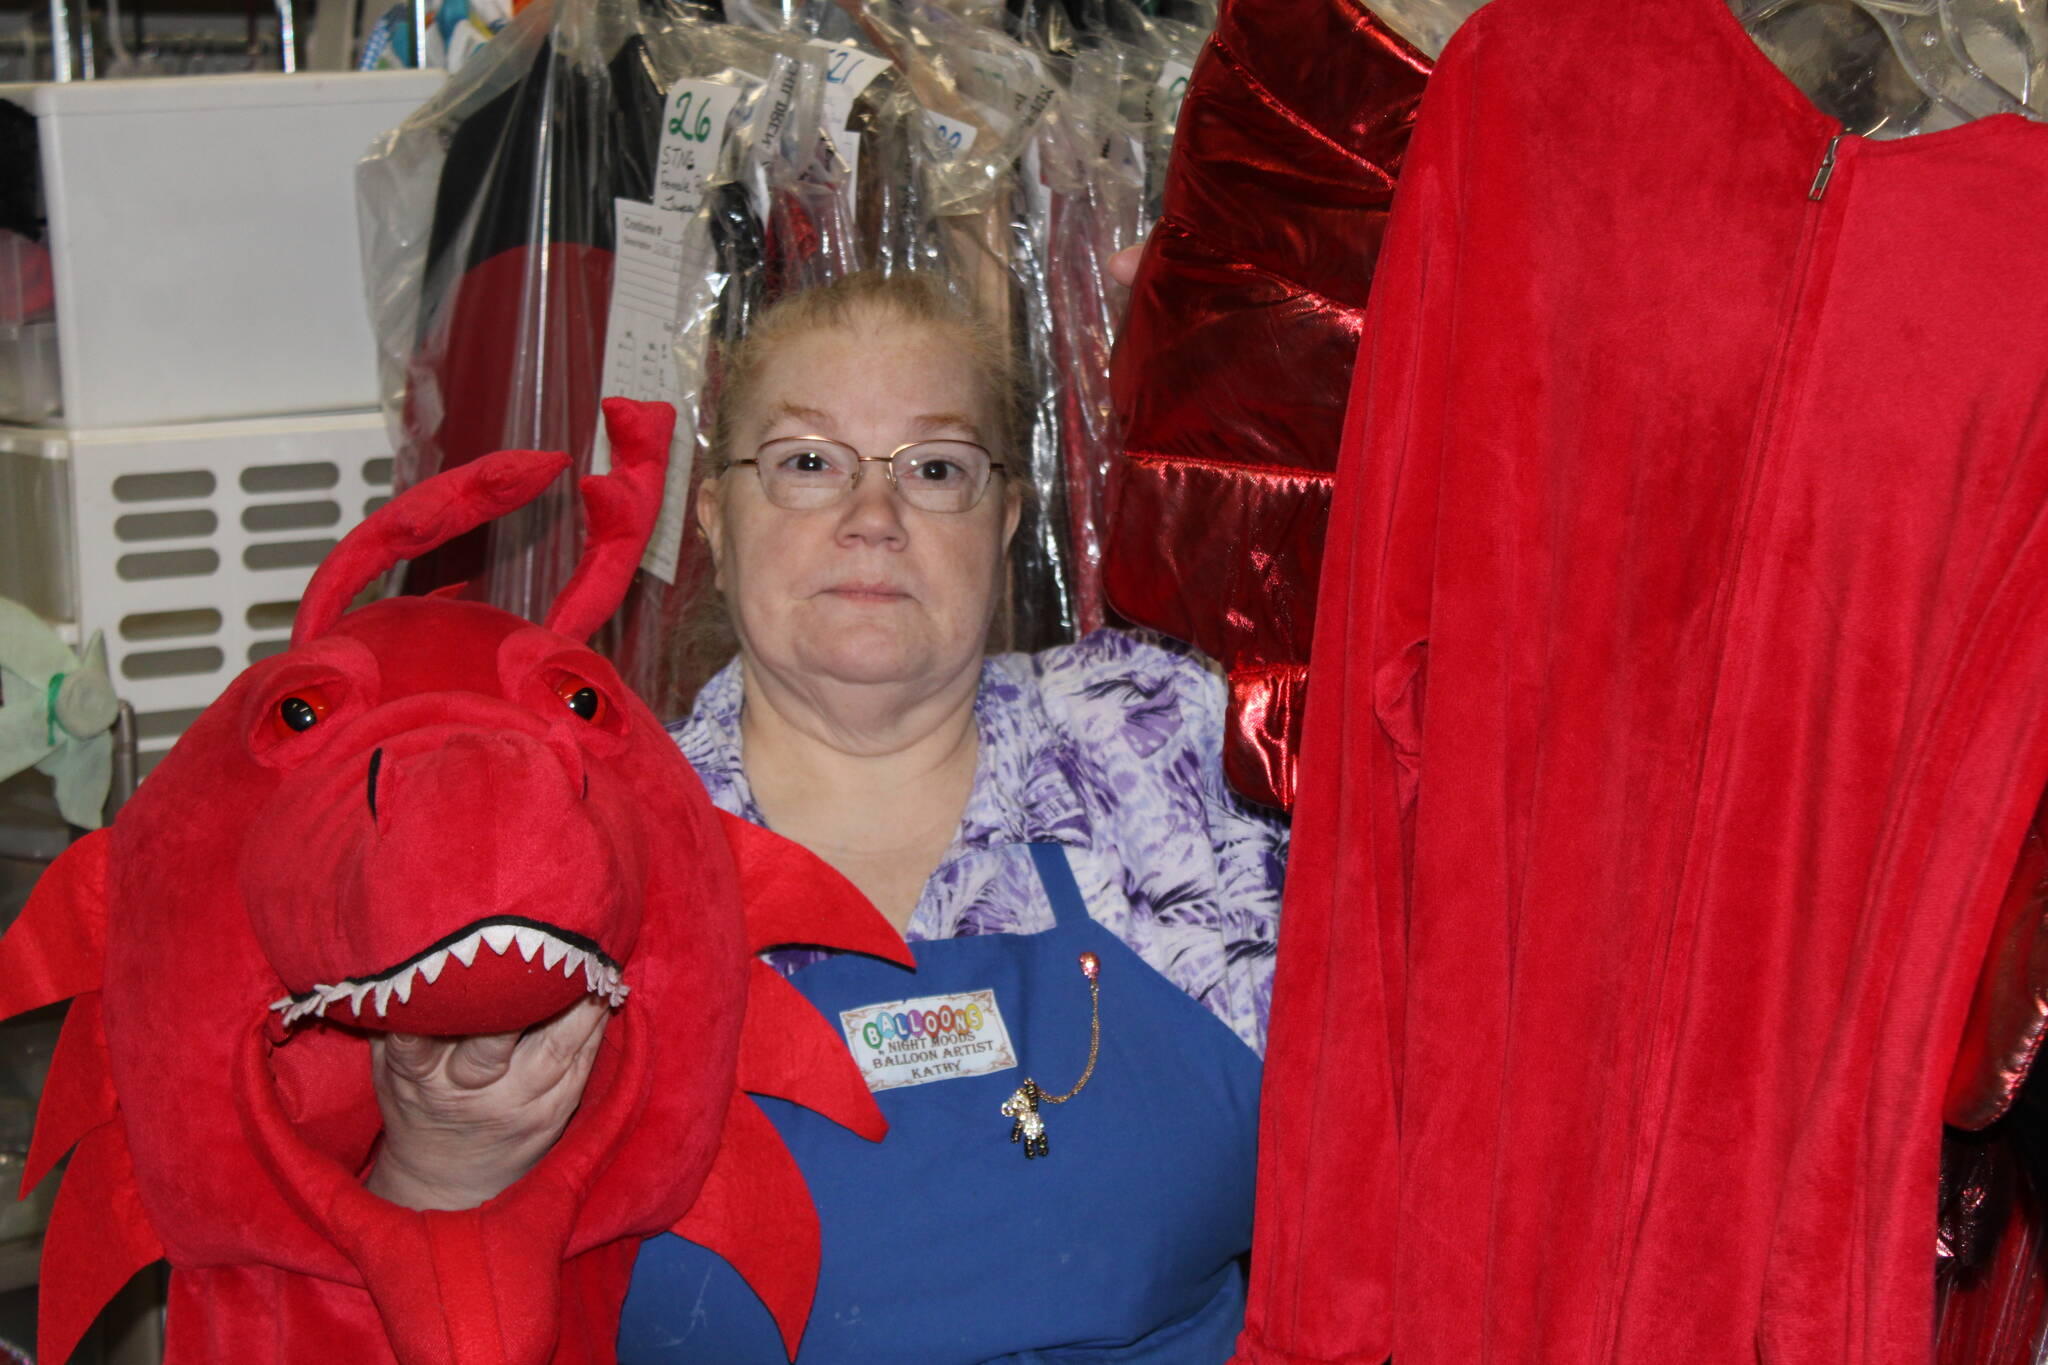 Self-described costume enthusiast and owner of Balloons by Night Moods, Kathy Buell, displays a dragon costume on Oct. 27. She said that the shop offers costumes for men, women and children and that plenty remain available for this weekend's festivities. (Dana Zigmund/Juneau Empire)